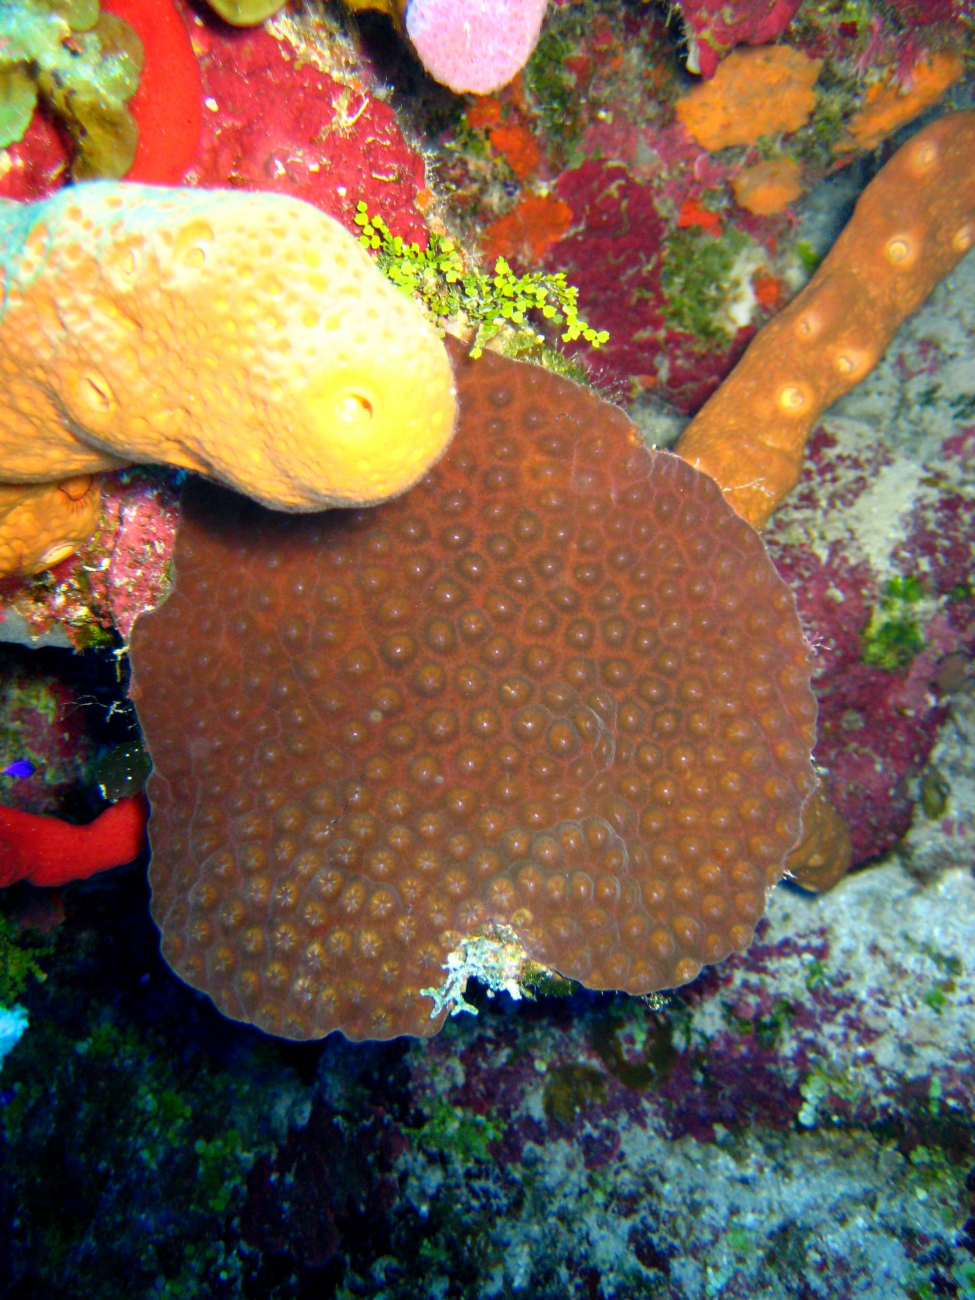 Brown coral, yellow,red, and orange sponges